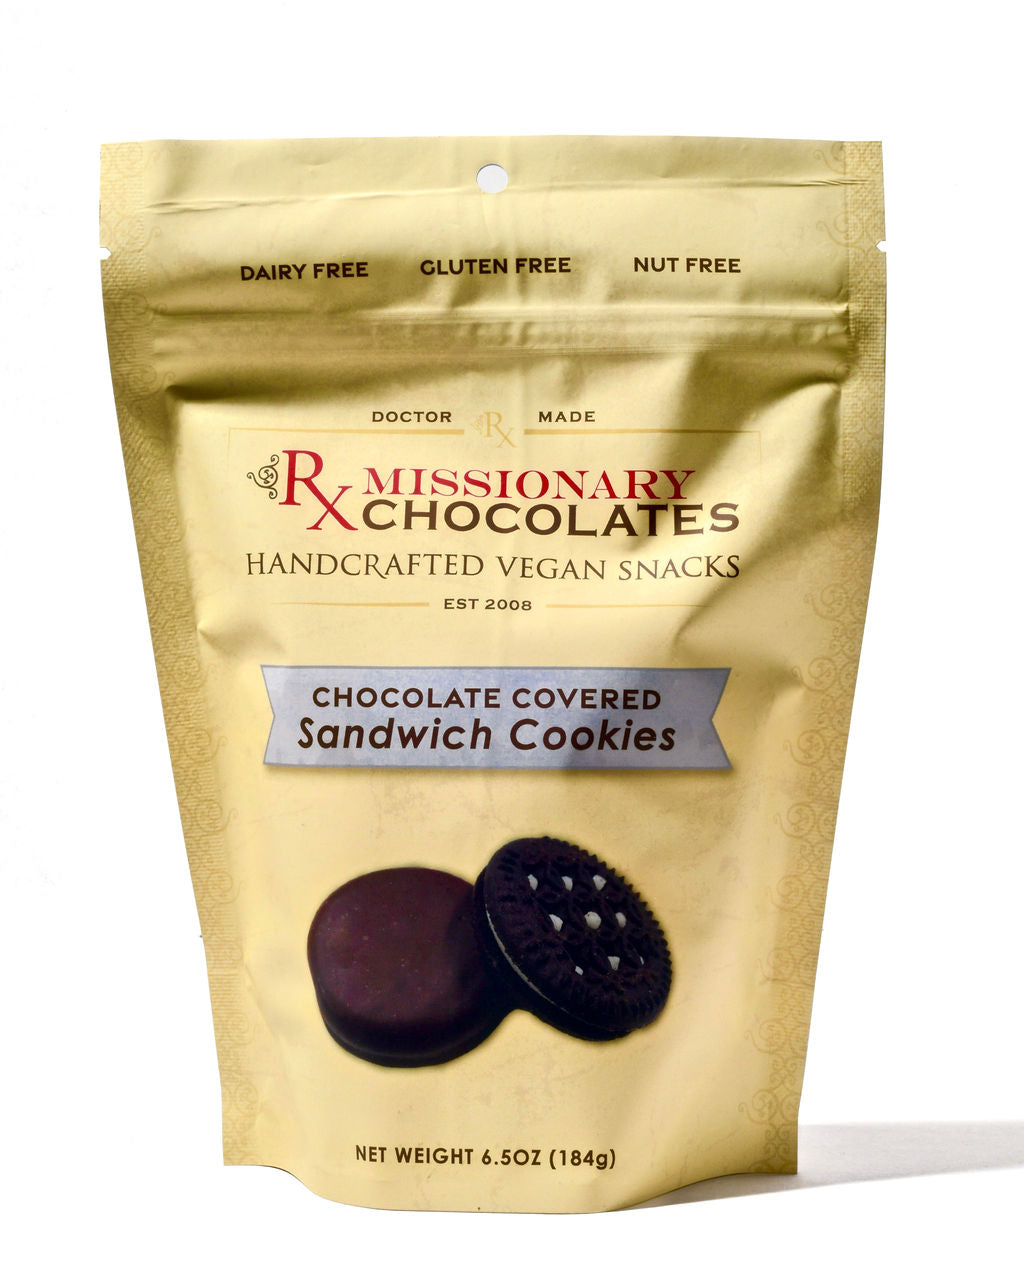 Chocolate covered Sandwich Cookies